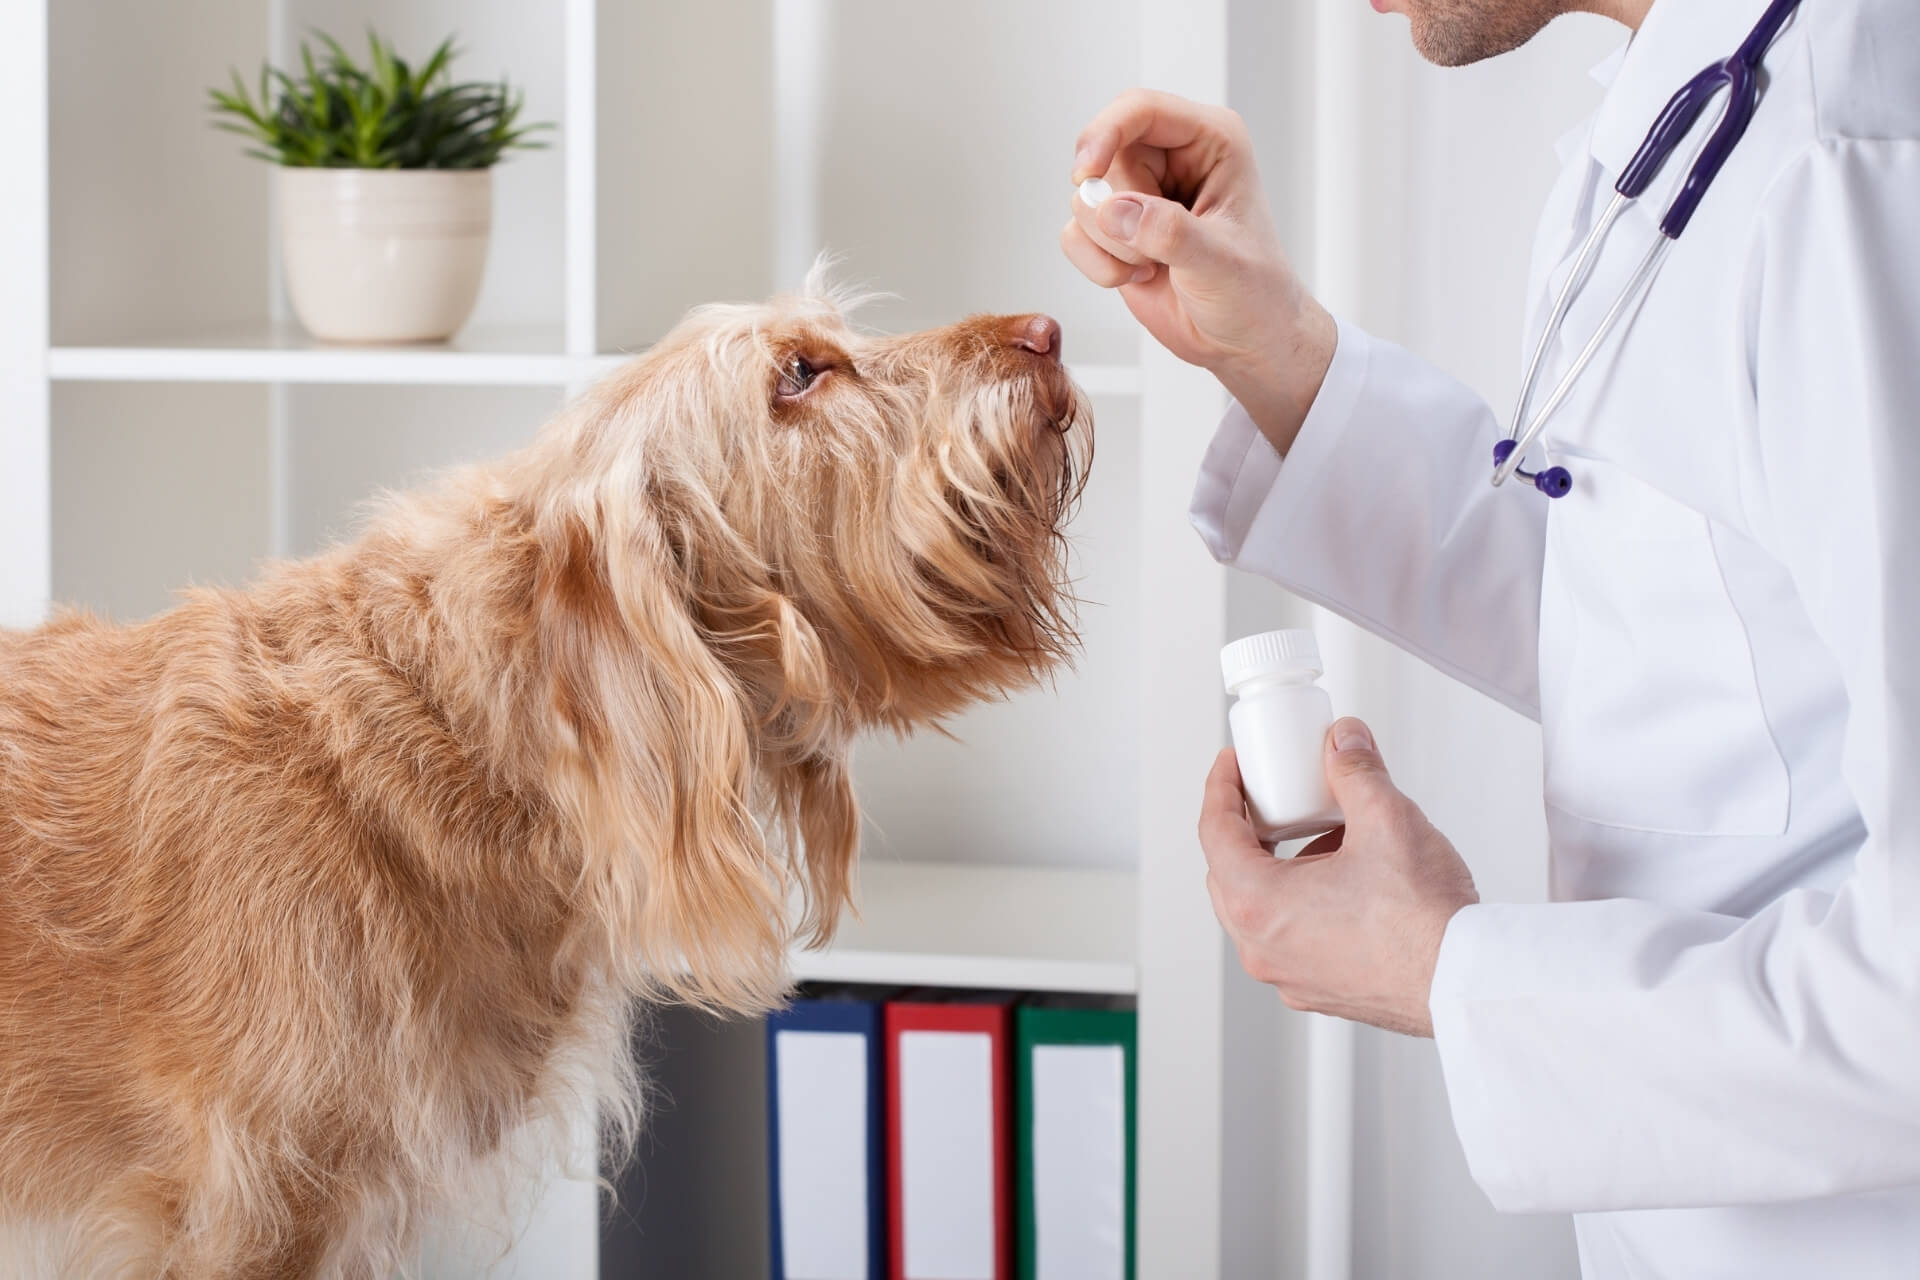 refill-request-form-pittsburgh-pa-greentree-animal-clinic